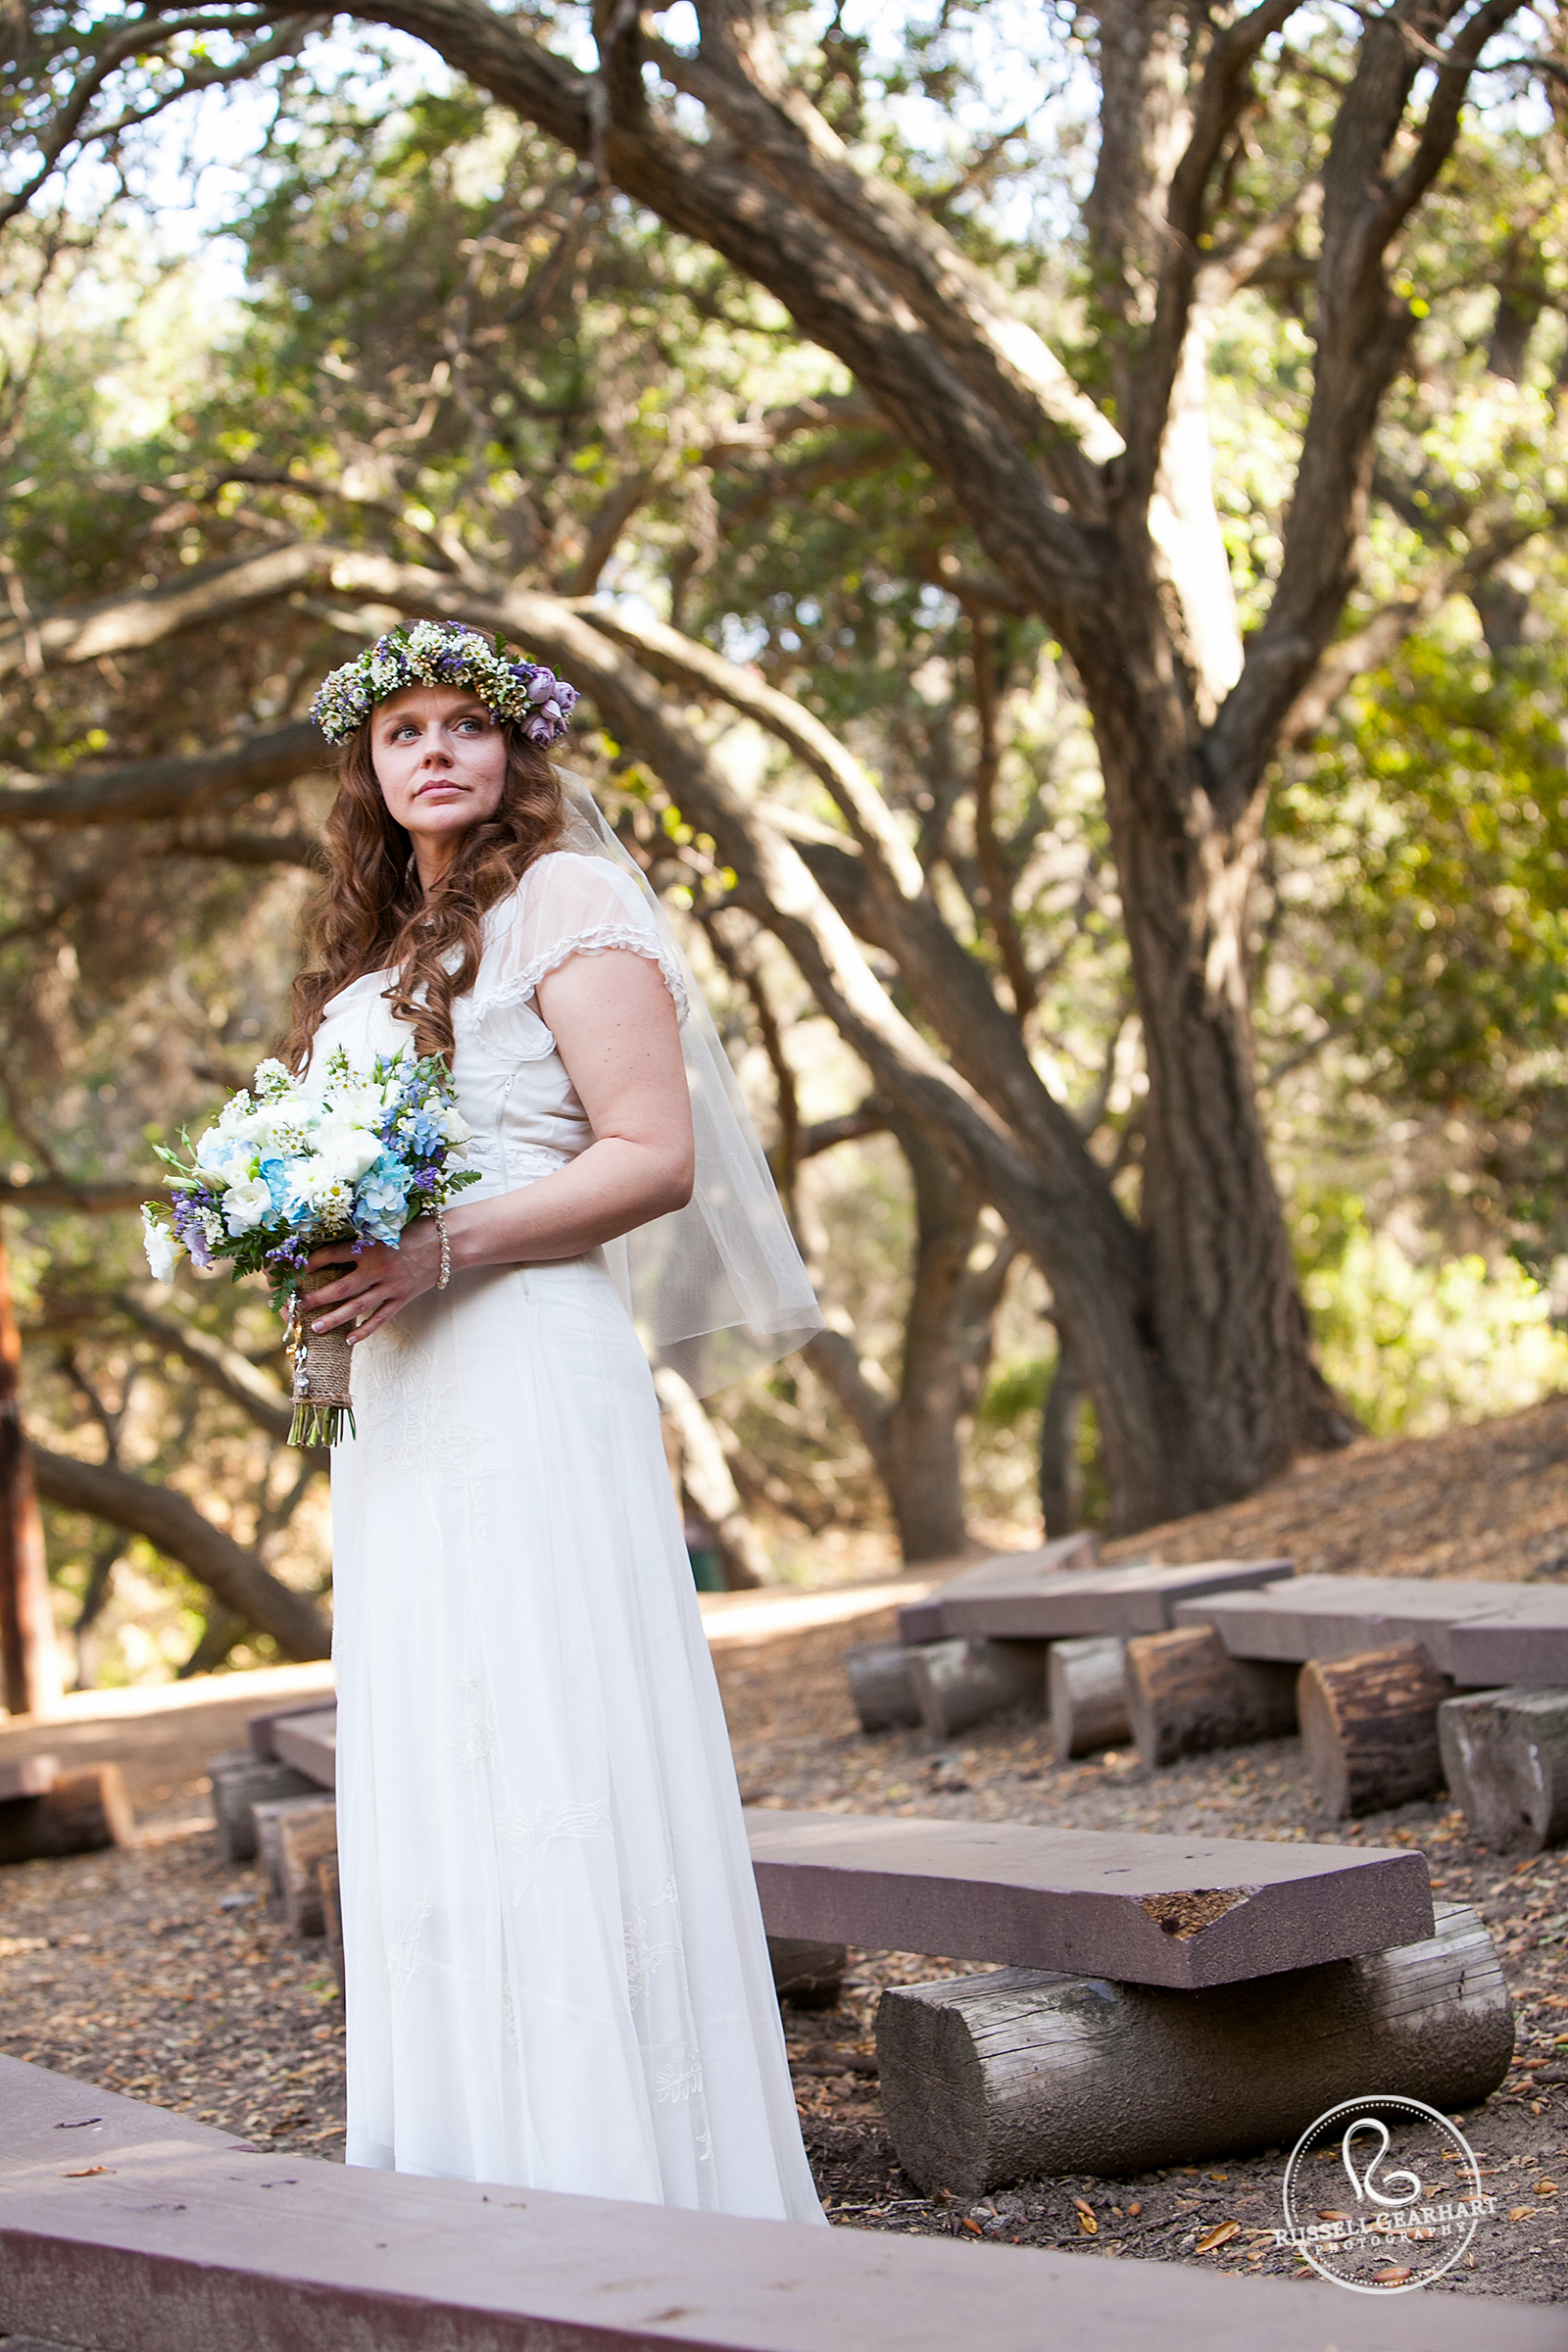 Whimsical Bohemian Bride – Oak Canyon Nature Center Wedding: Orange County, CA – Russell Gearhart Photography – www.gearhartphoto.com  